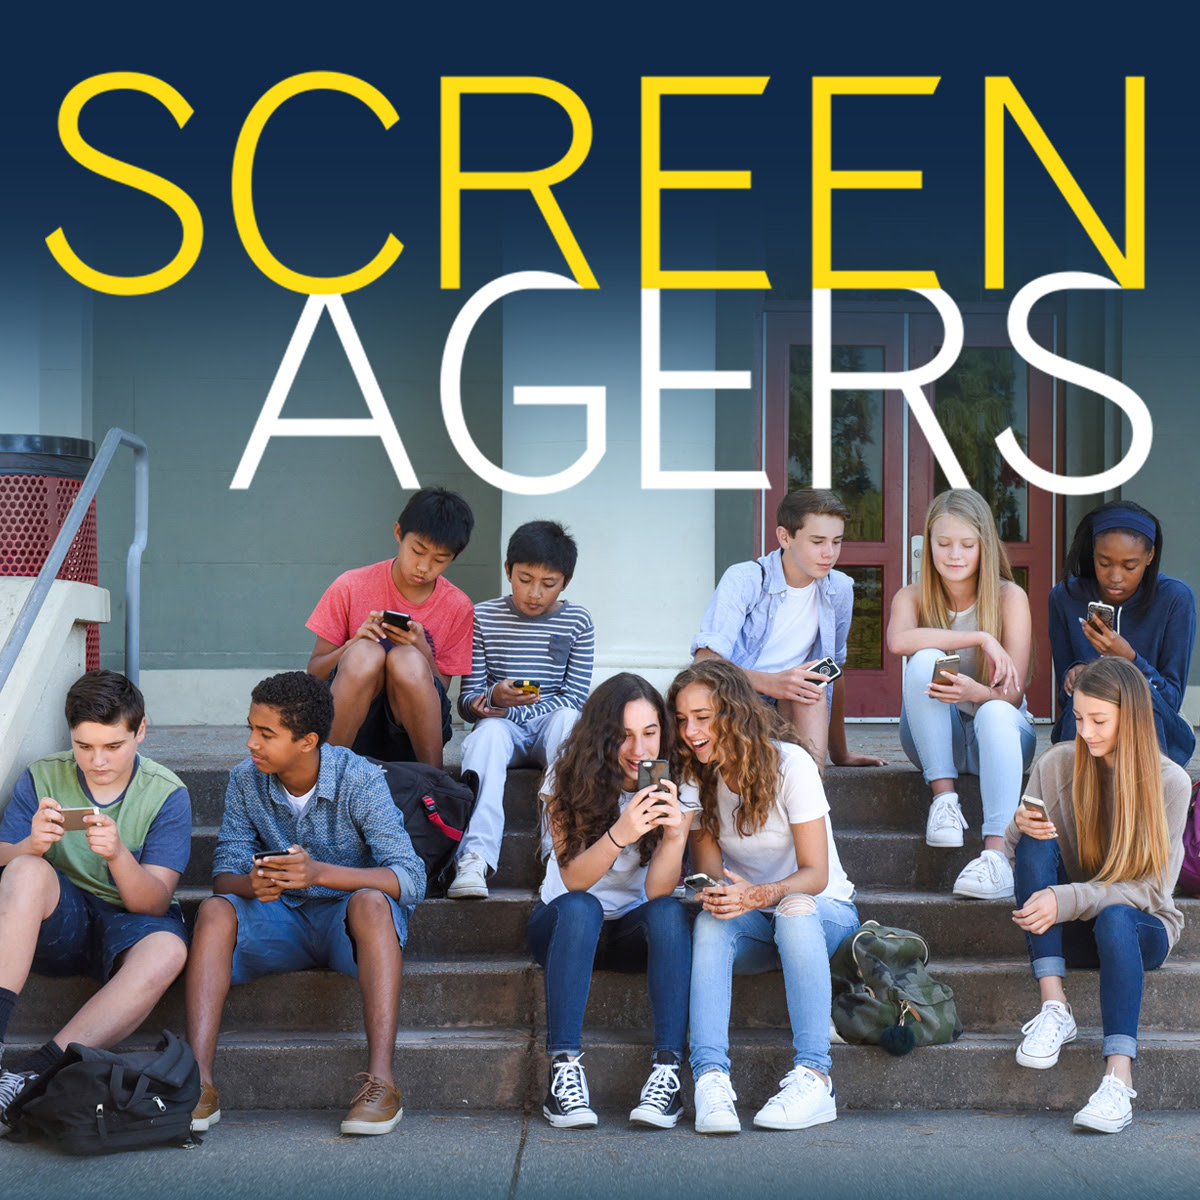 Screenagers Film Presented By The Montessori School of Raleigh